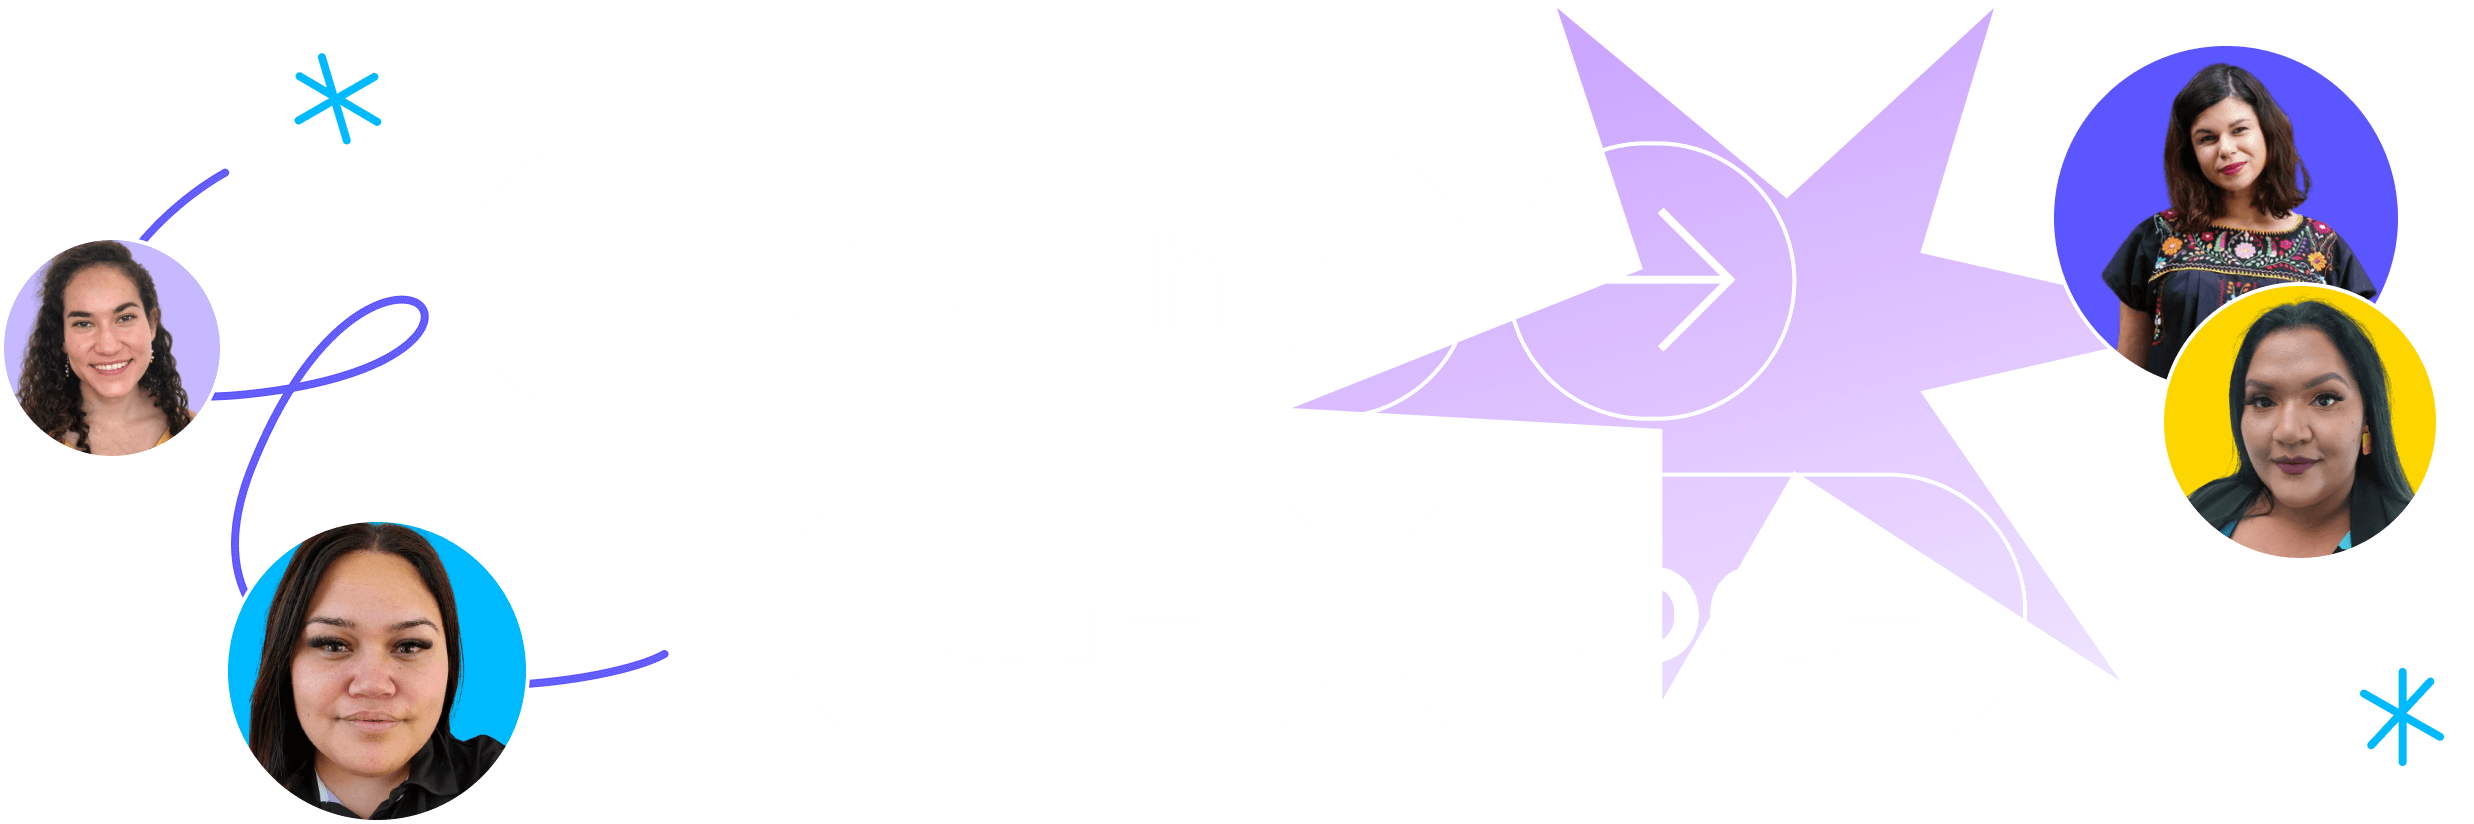 Cracking the code